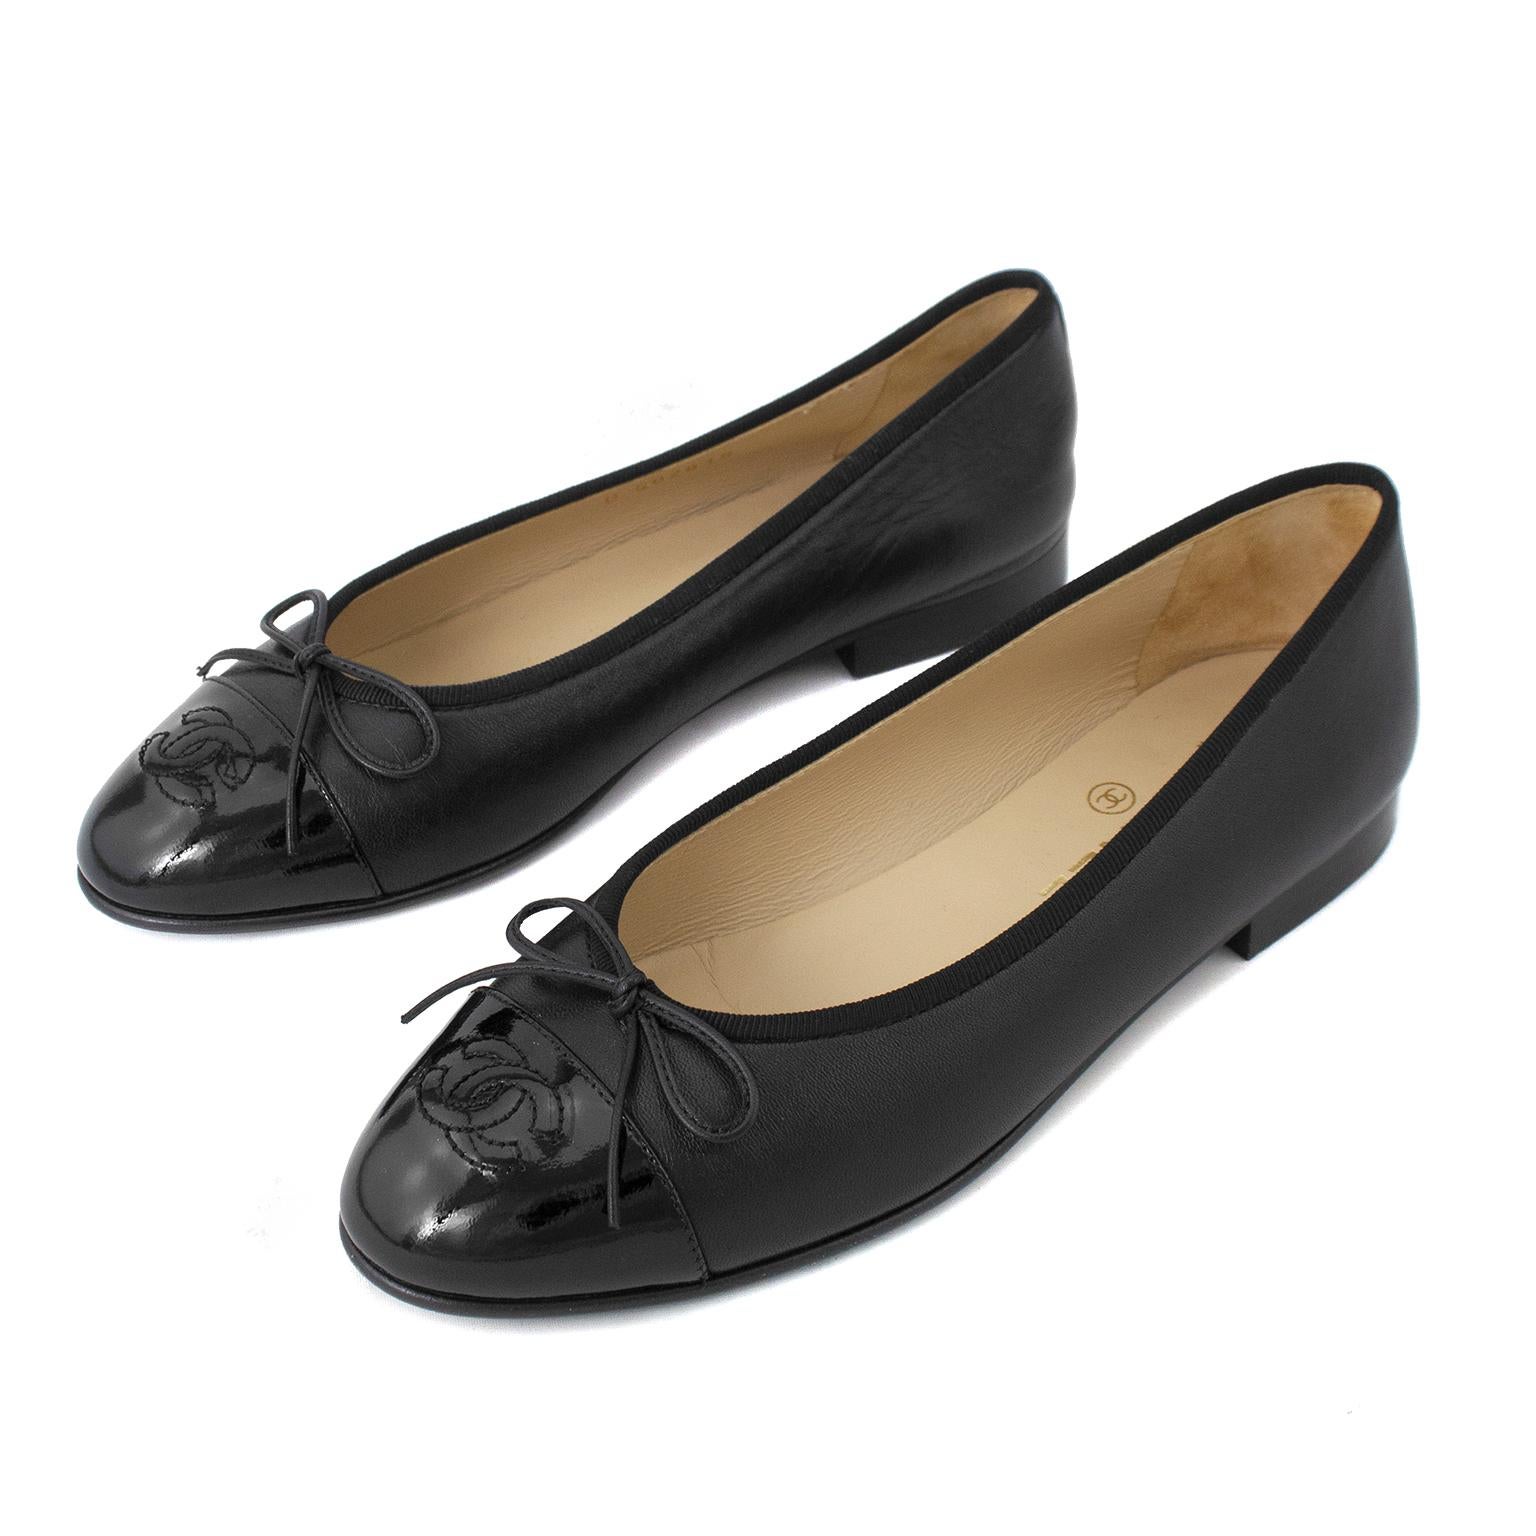 Classic and always chic black leather Chanel ballet flats with patent leather cap-toes, bow accents at vamps, grosgrain trim and stacked heels. Excellent vintage condition. Slight scuffing to soles. No box. Size 37. Fit closer to US 6.5.

Please